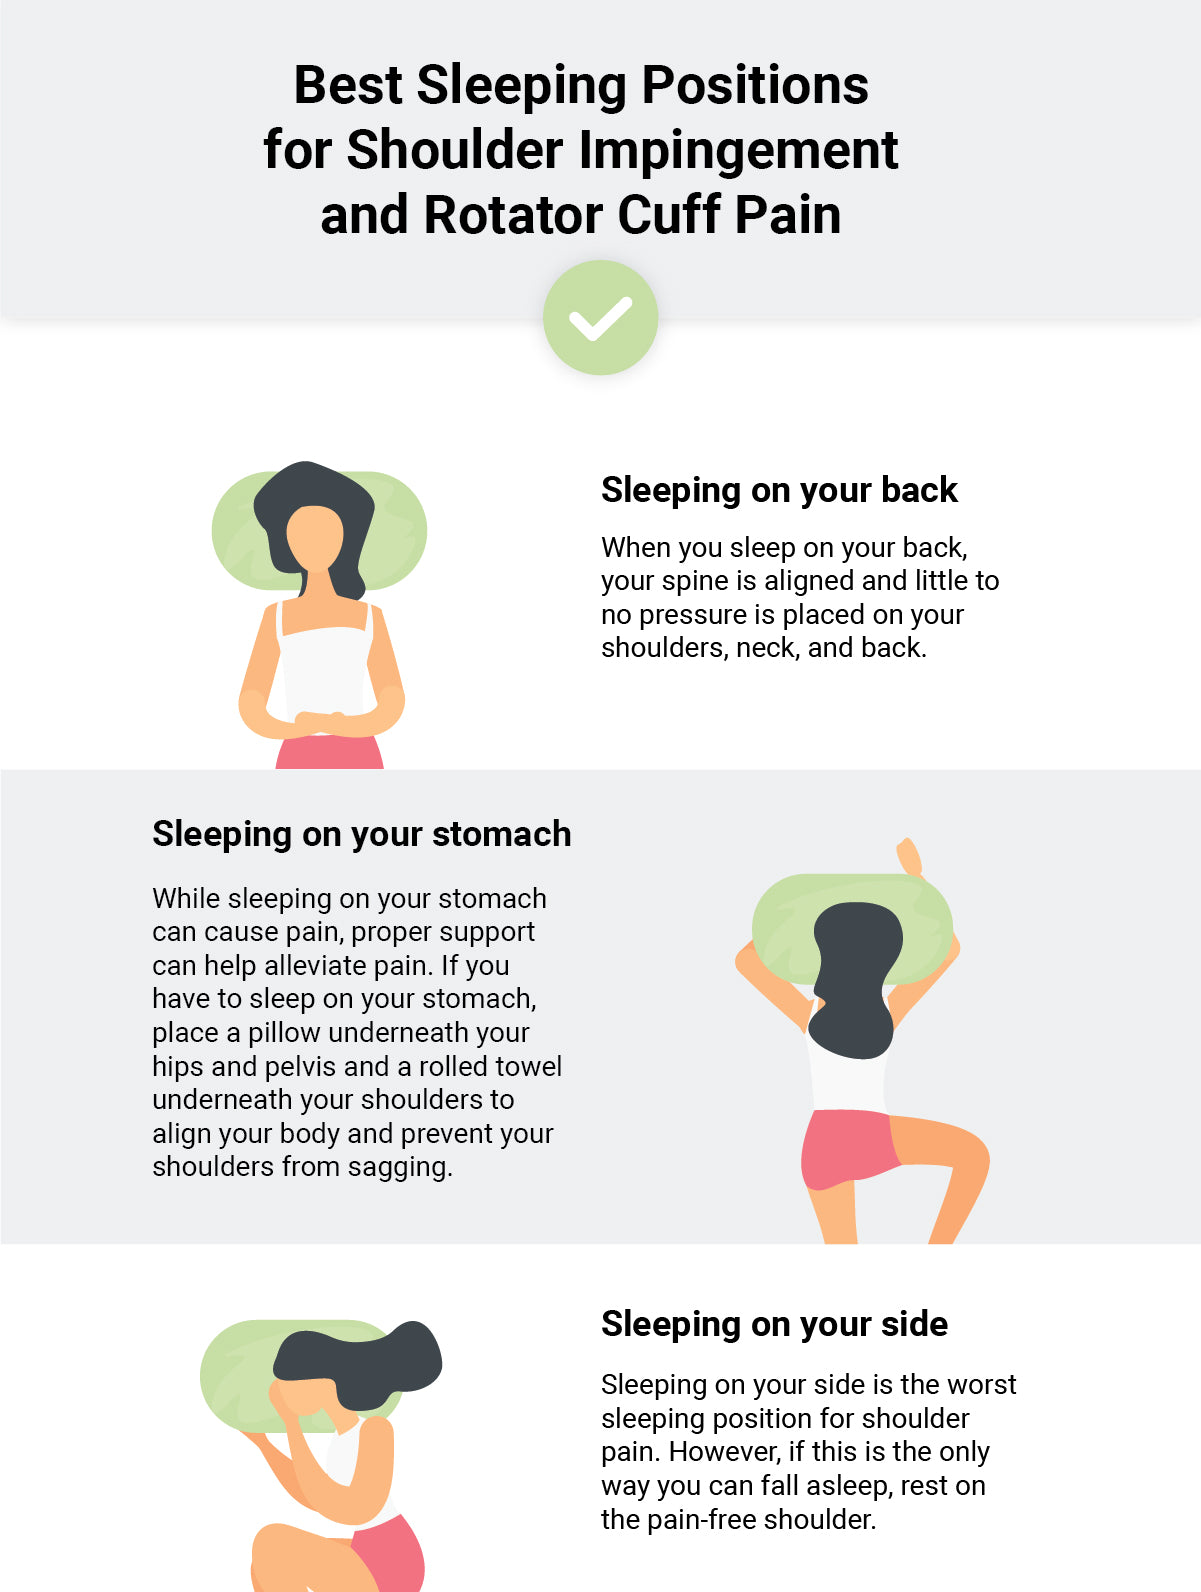 10+ Tips for How to Sleep with Shoulder Impingement